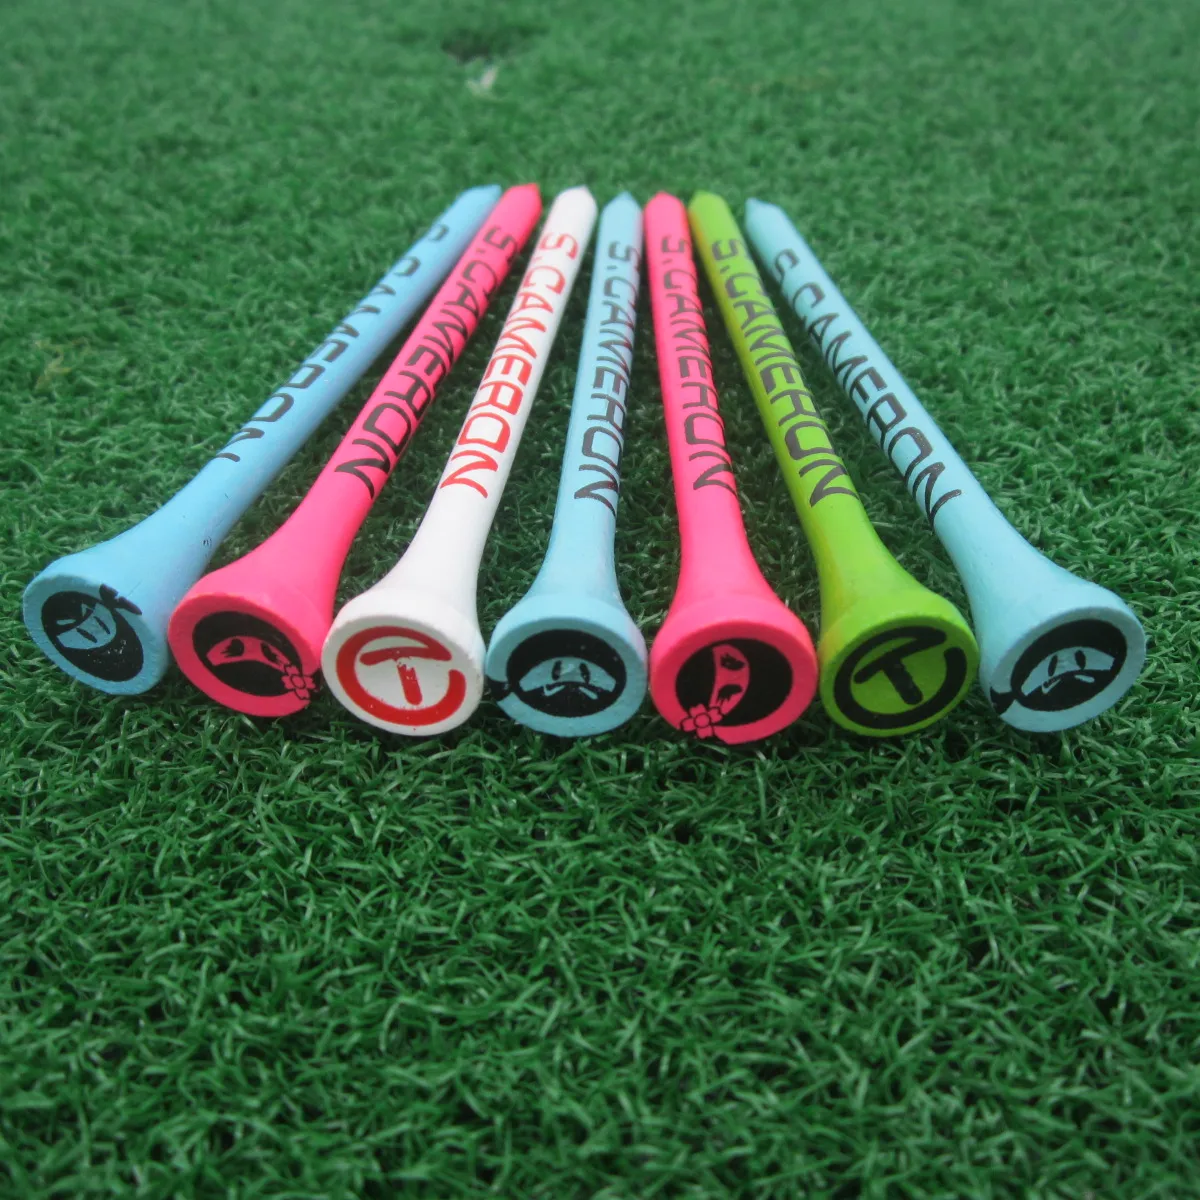 Personalized Bright Color Bamboo Golf Tees - Buy Bamboo Golf Tee,Color ...